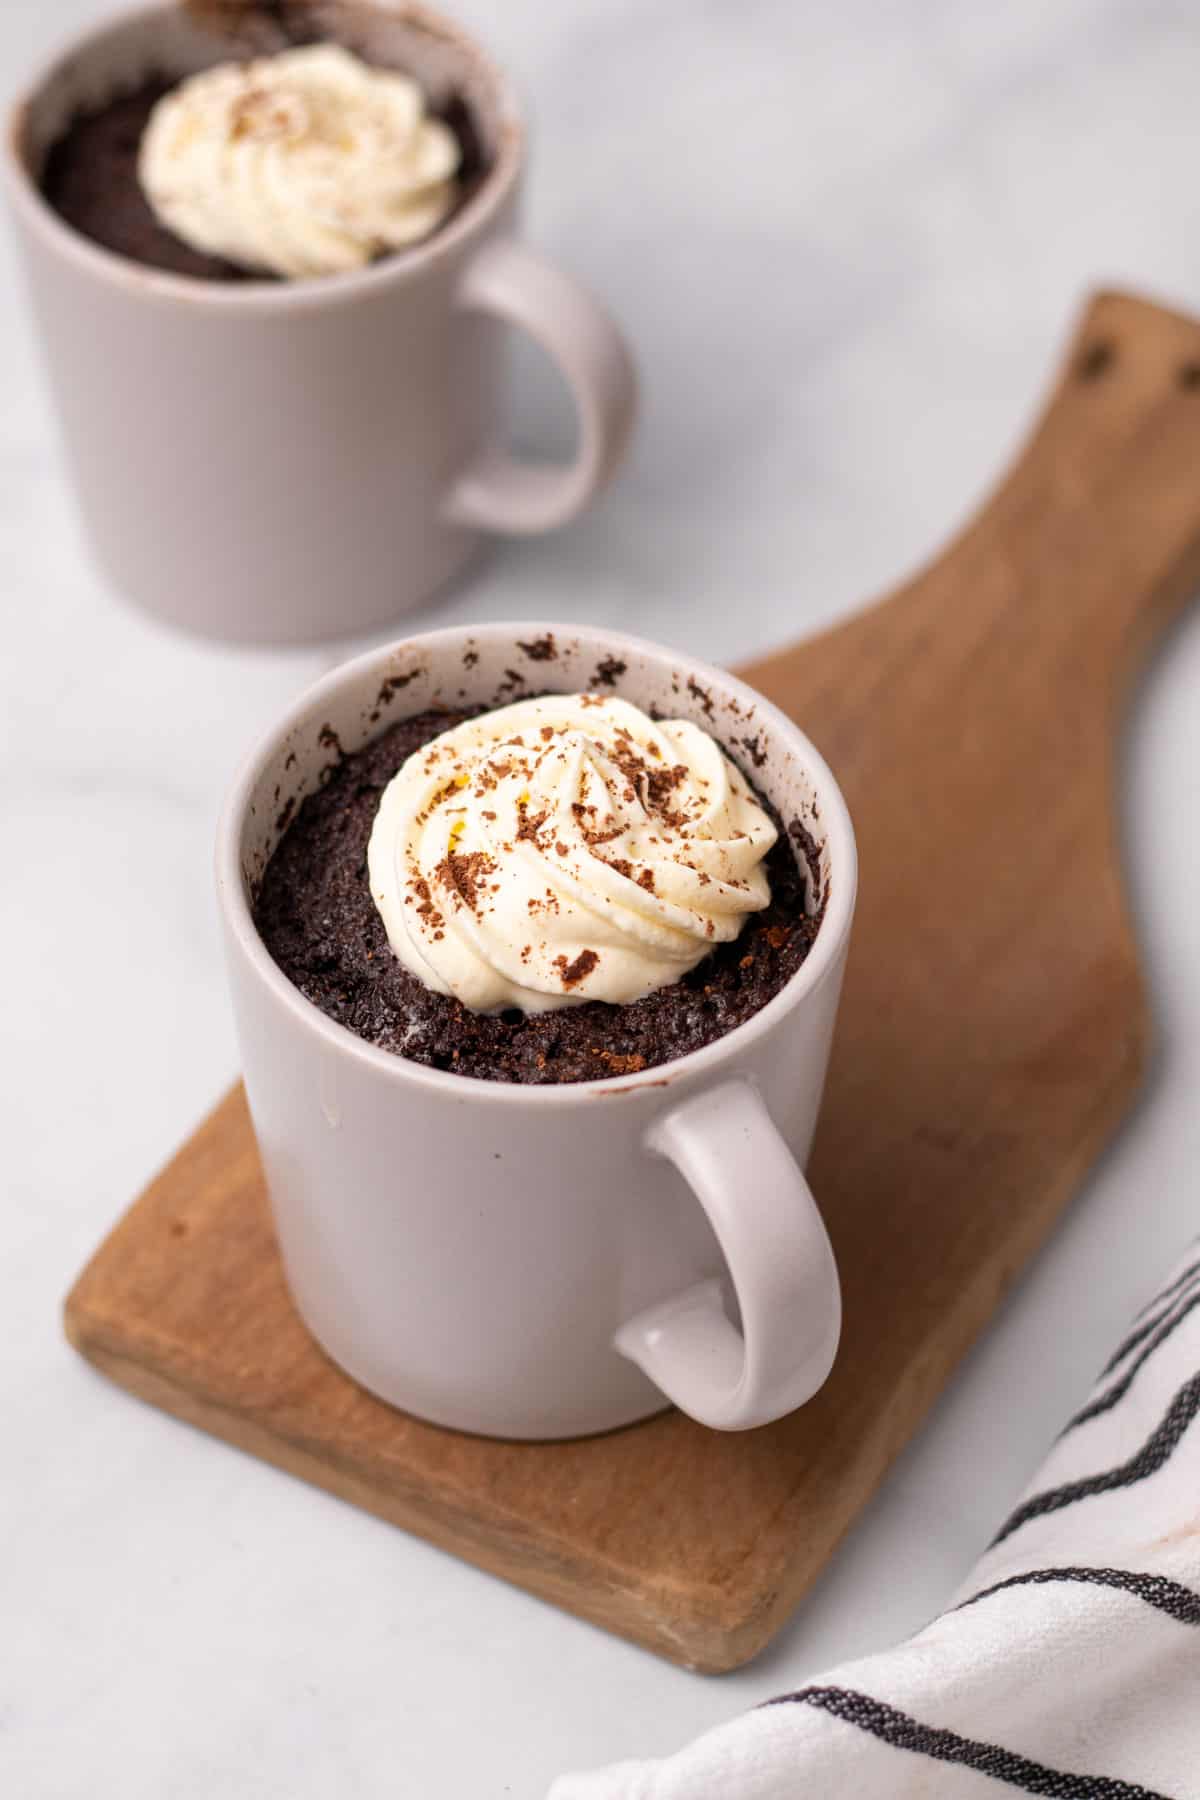 Chocolate mug cakes. One mug sits on a wooden board. The mug cakes have been topped with s swirl of cream.